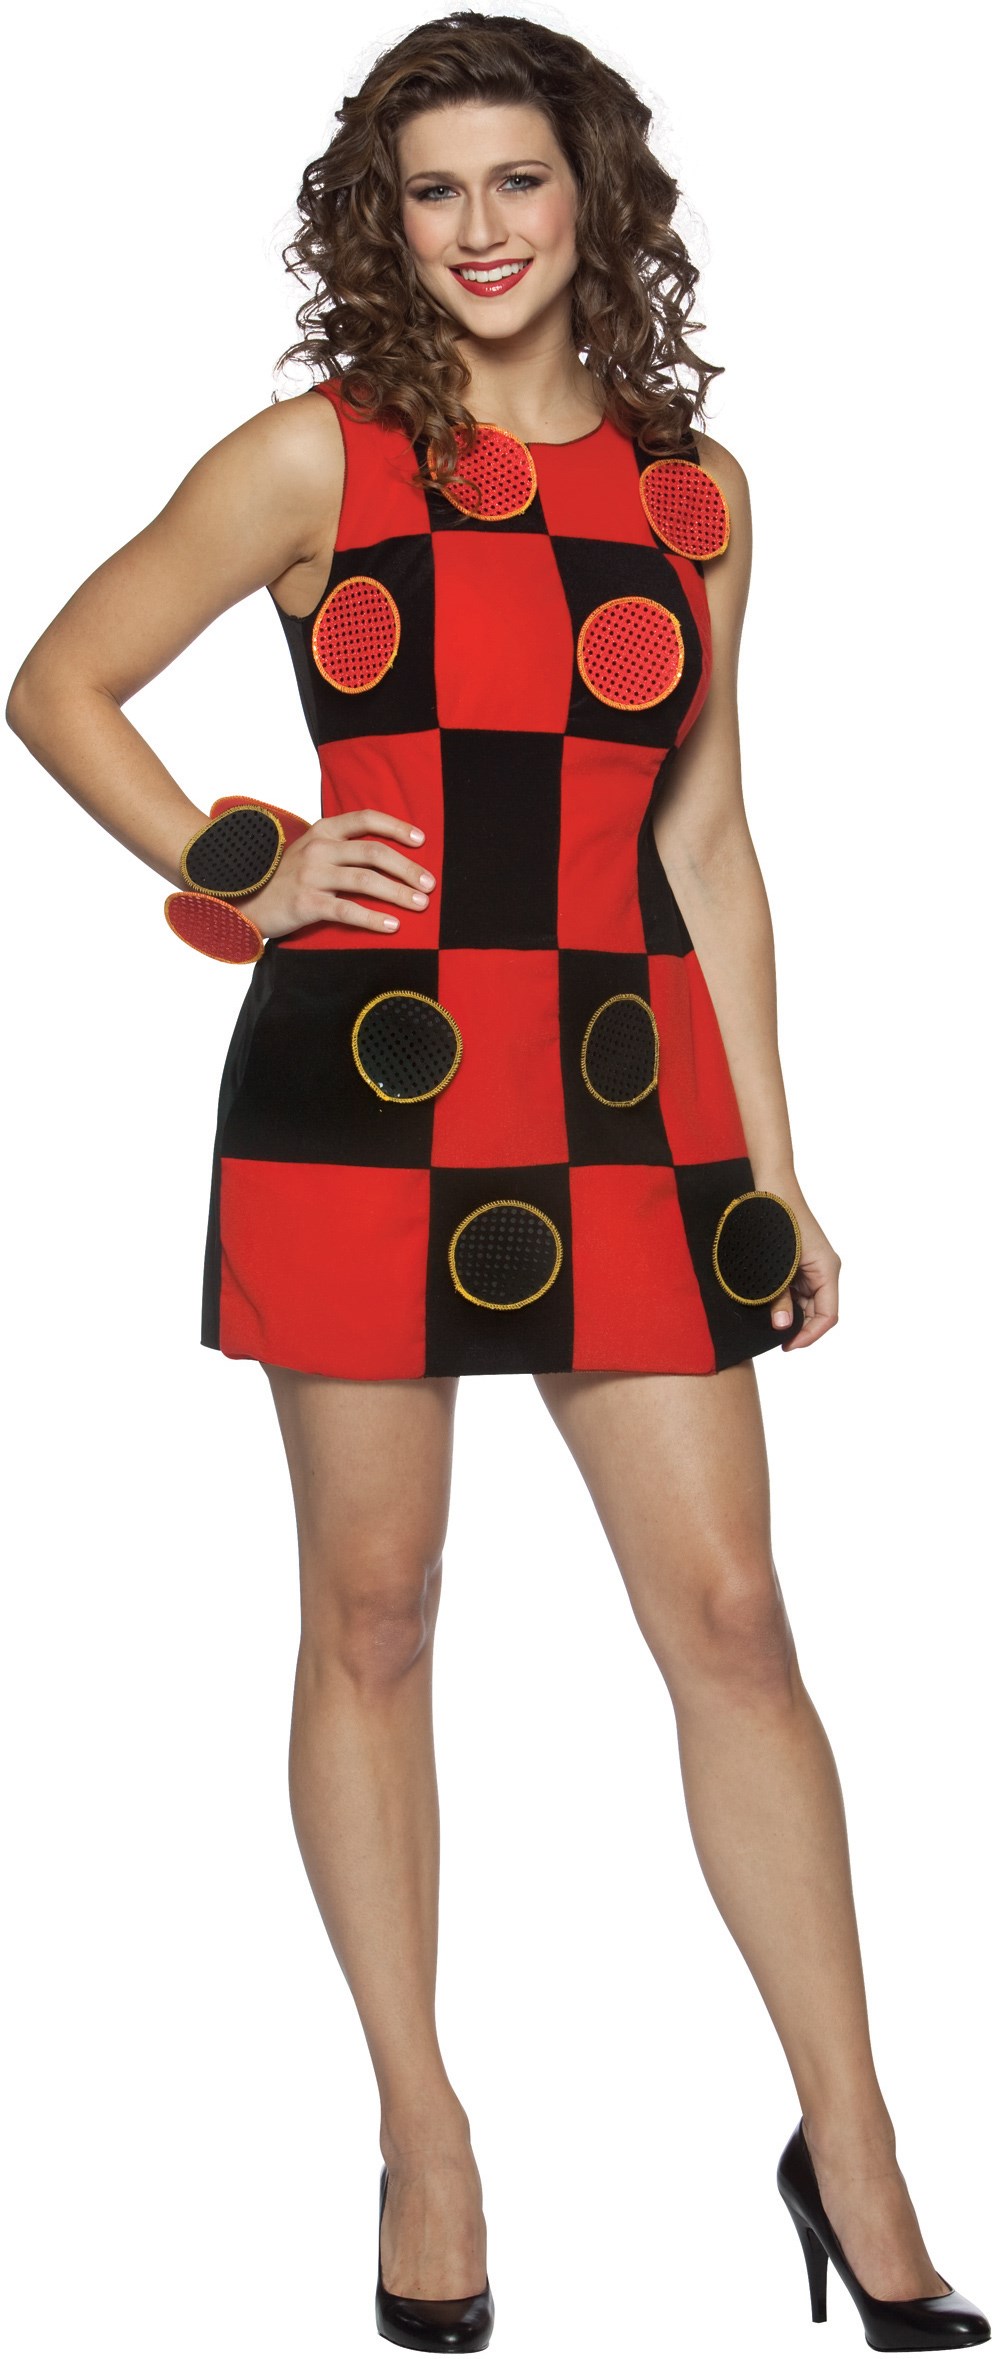 King Me! Checkers Dress Adult Costume